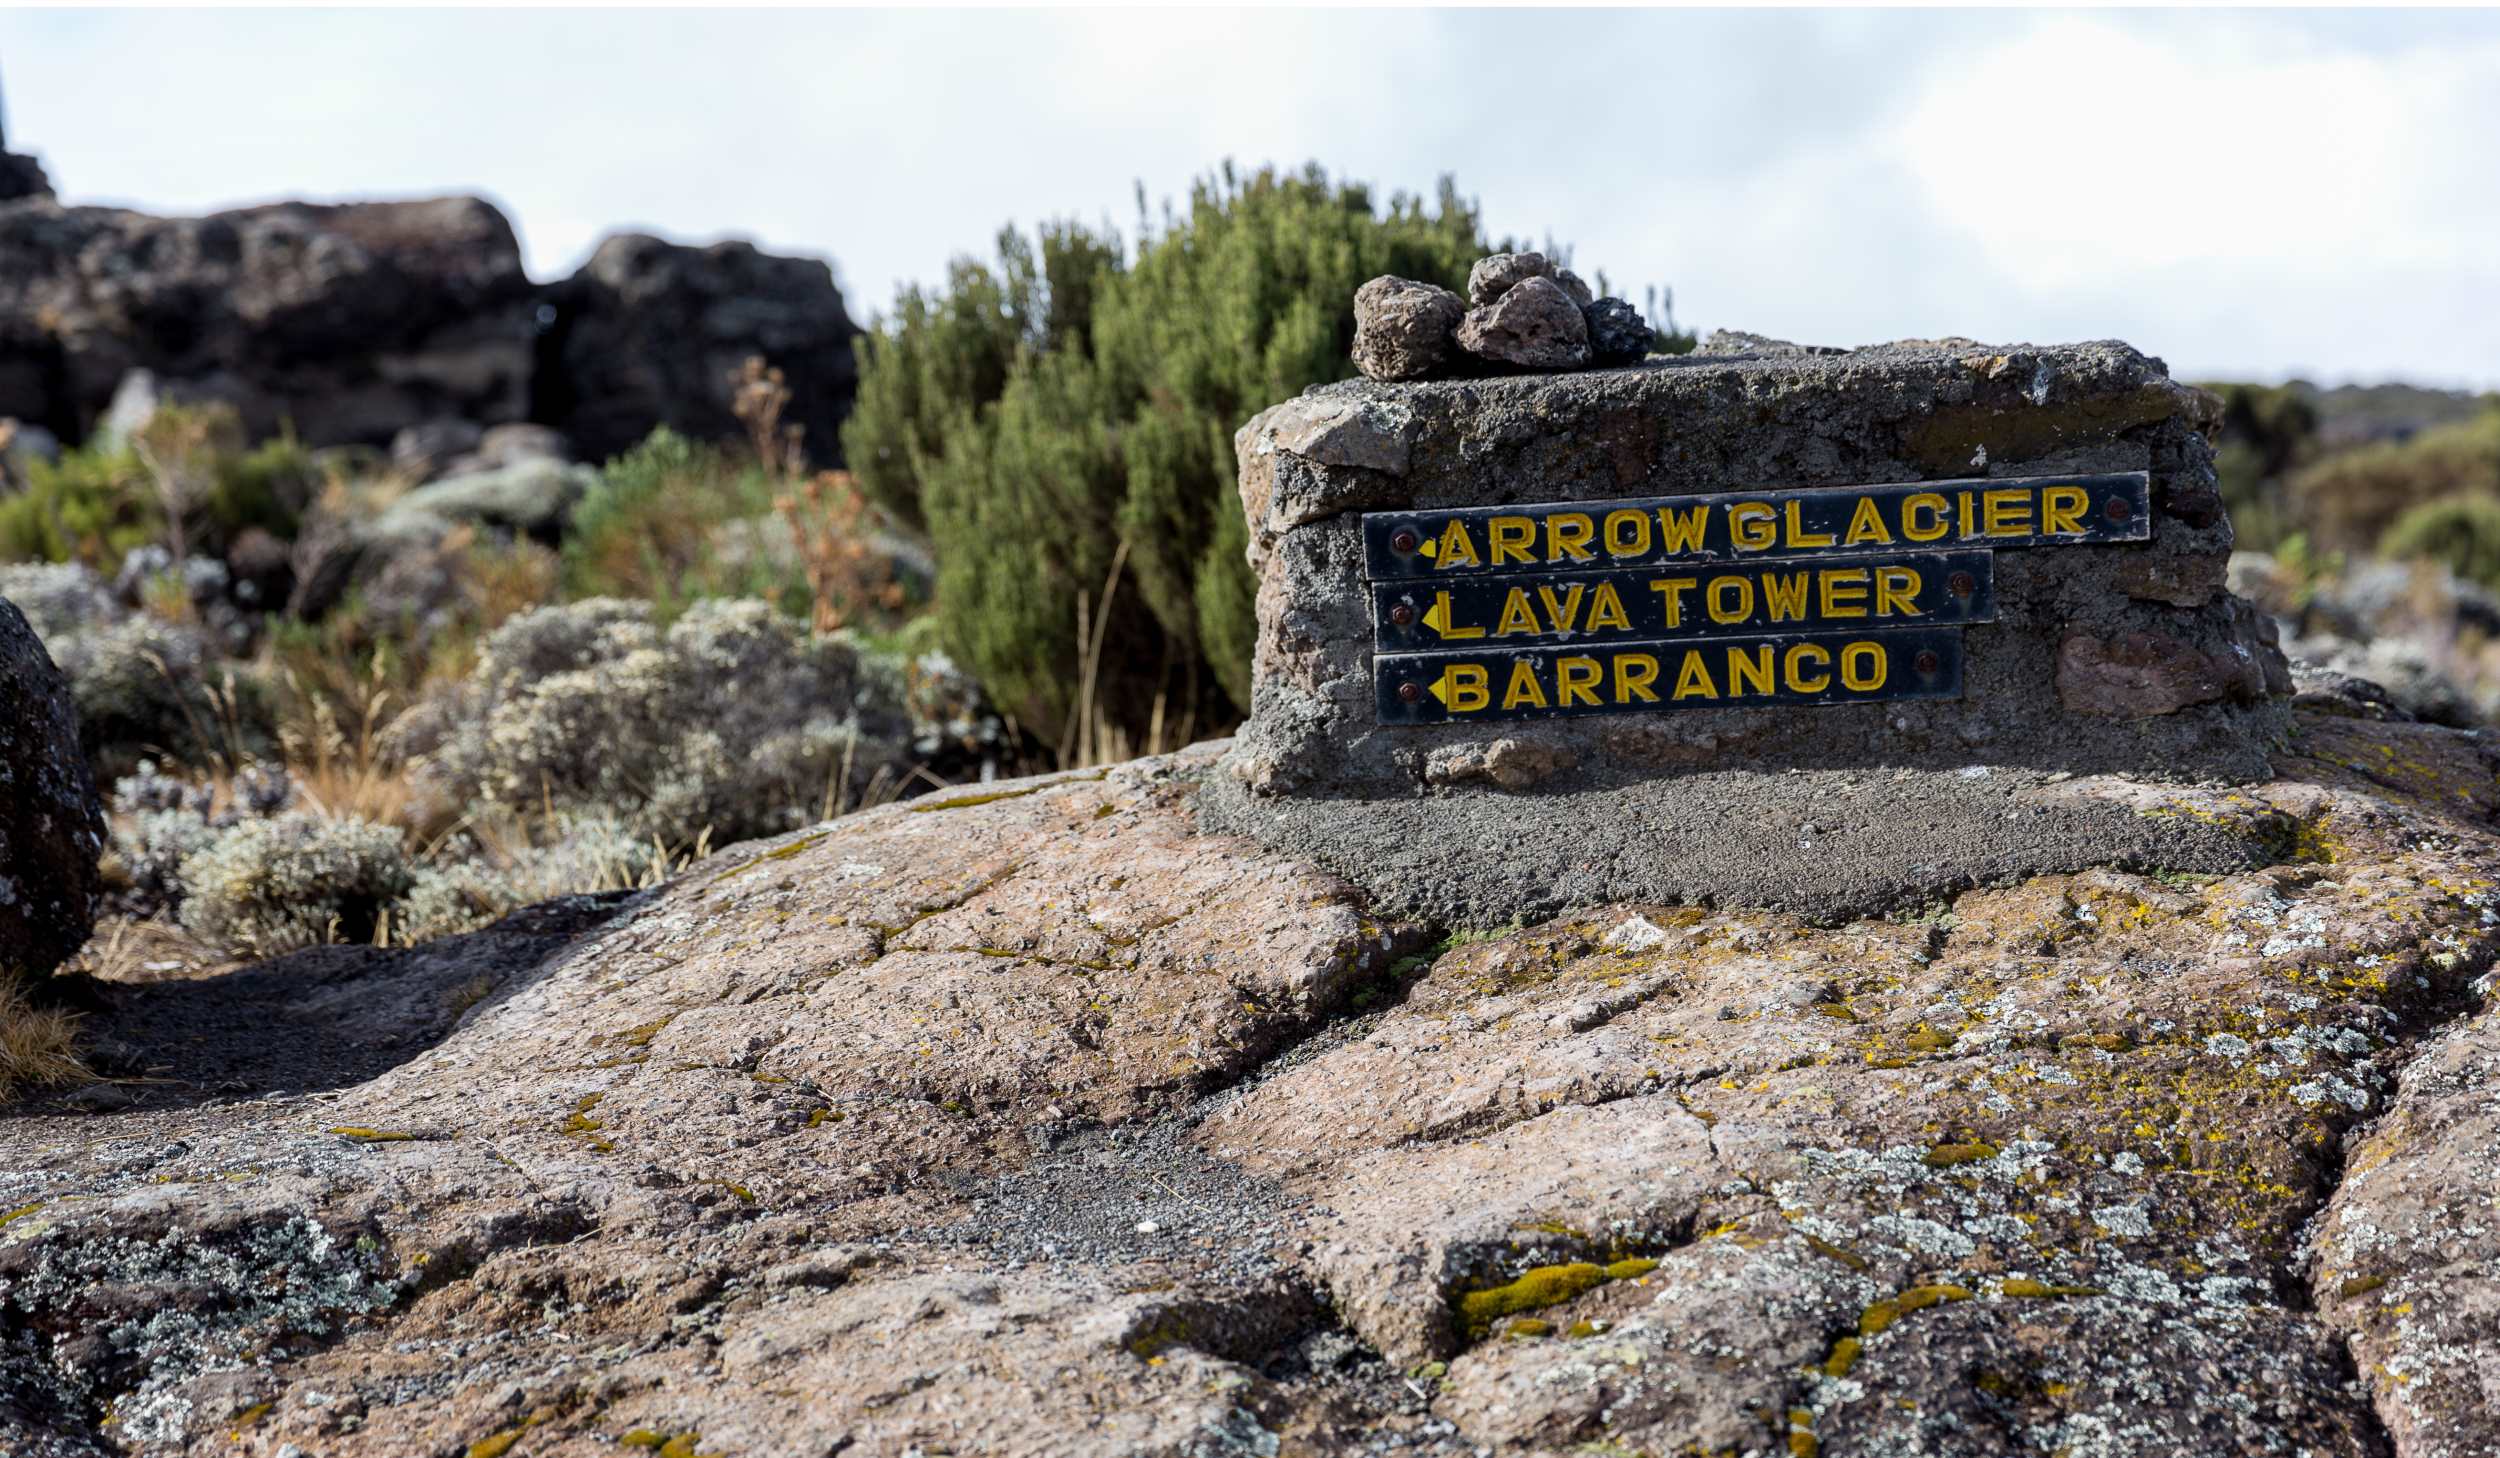 Machame route 7 days, day 3: Shira Camp (3,840 m/ 12,600 ft) - Lava Tower (4630 m/ 15,190 ft) - Barranco Camp (3,960m m/ 12,992 ft)